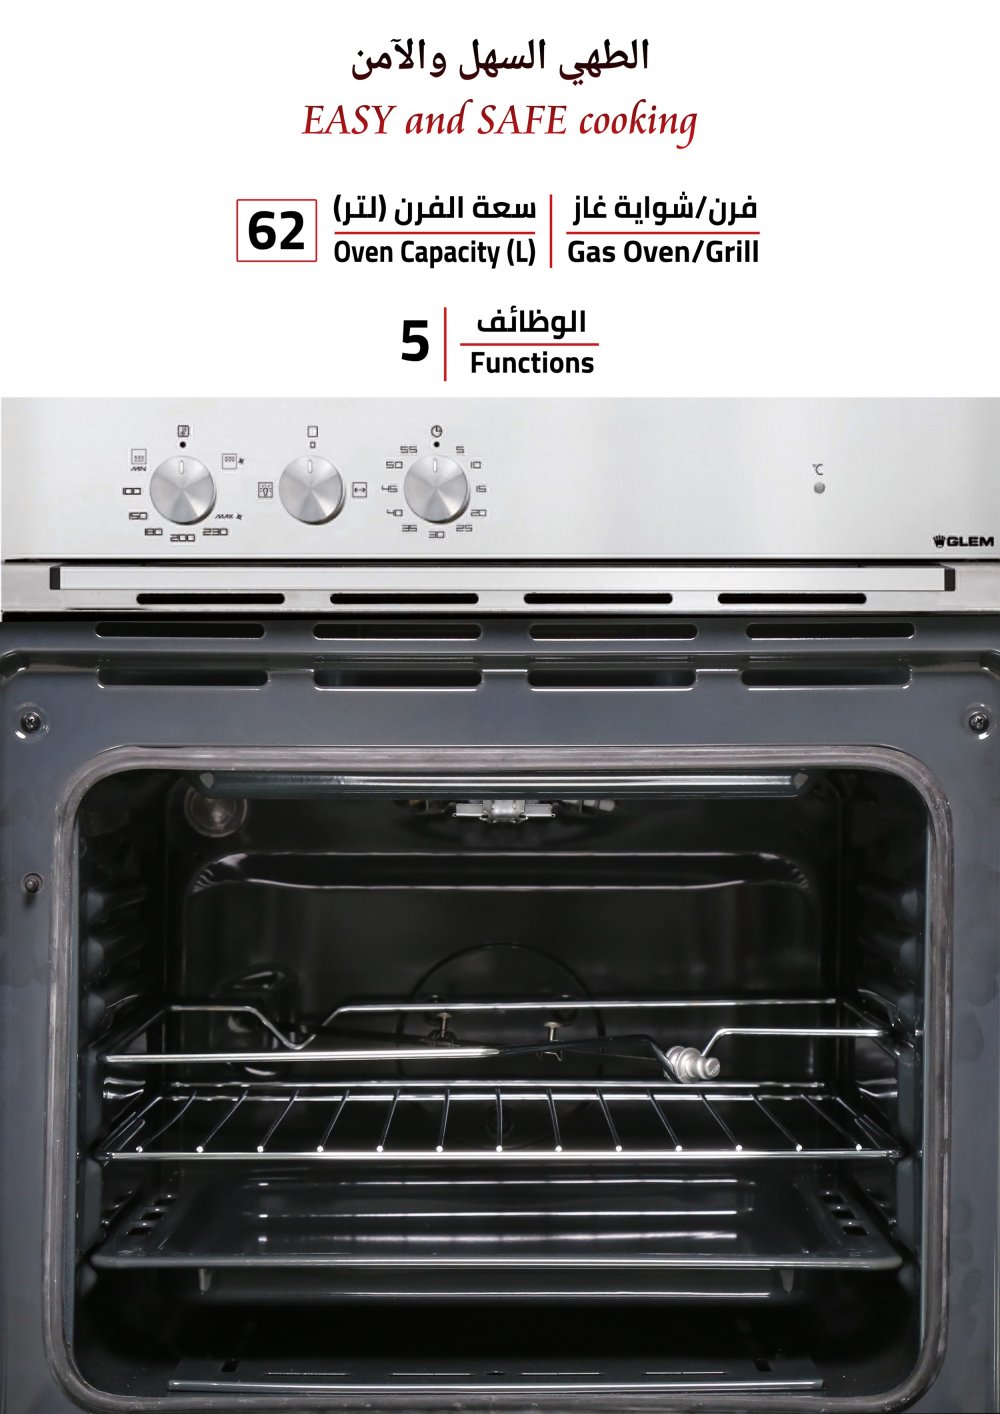 Oven Gas,59.7cm,5Fn,Static